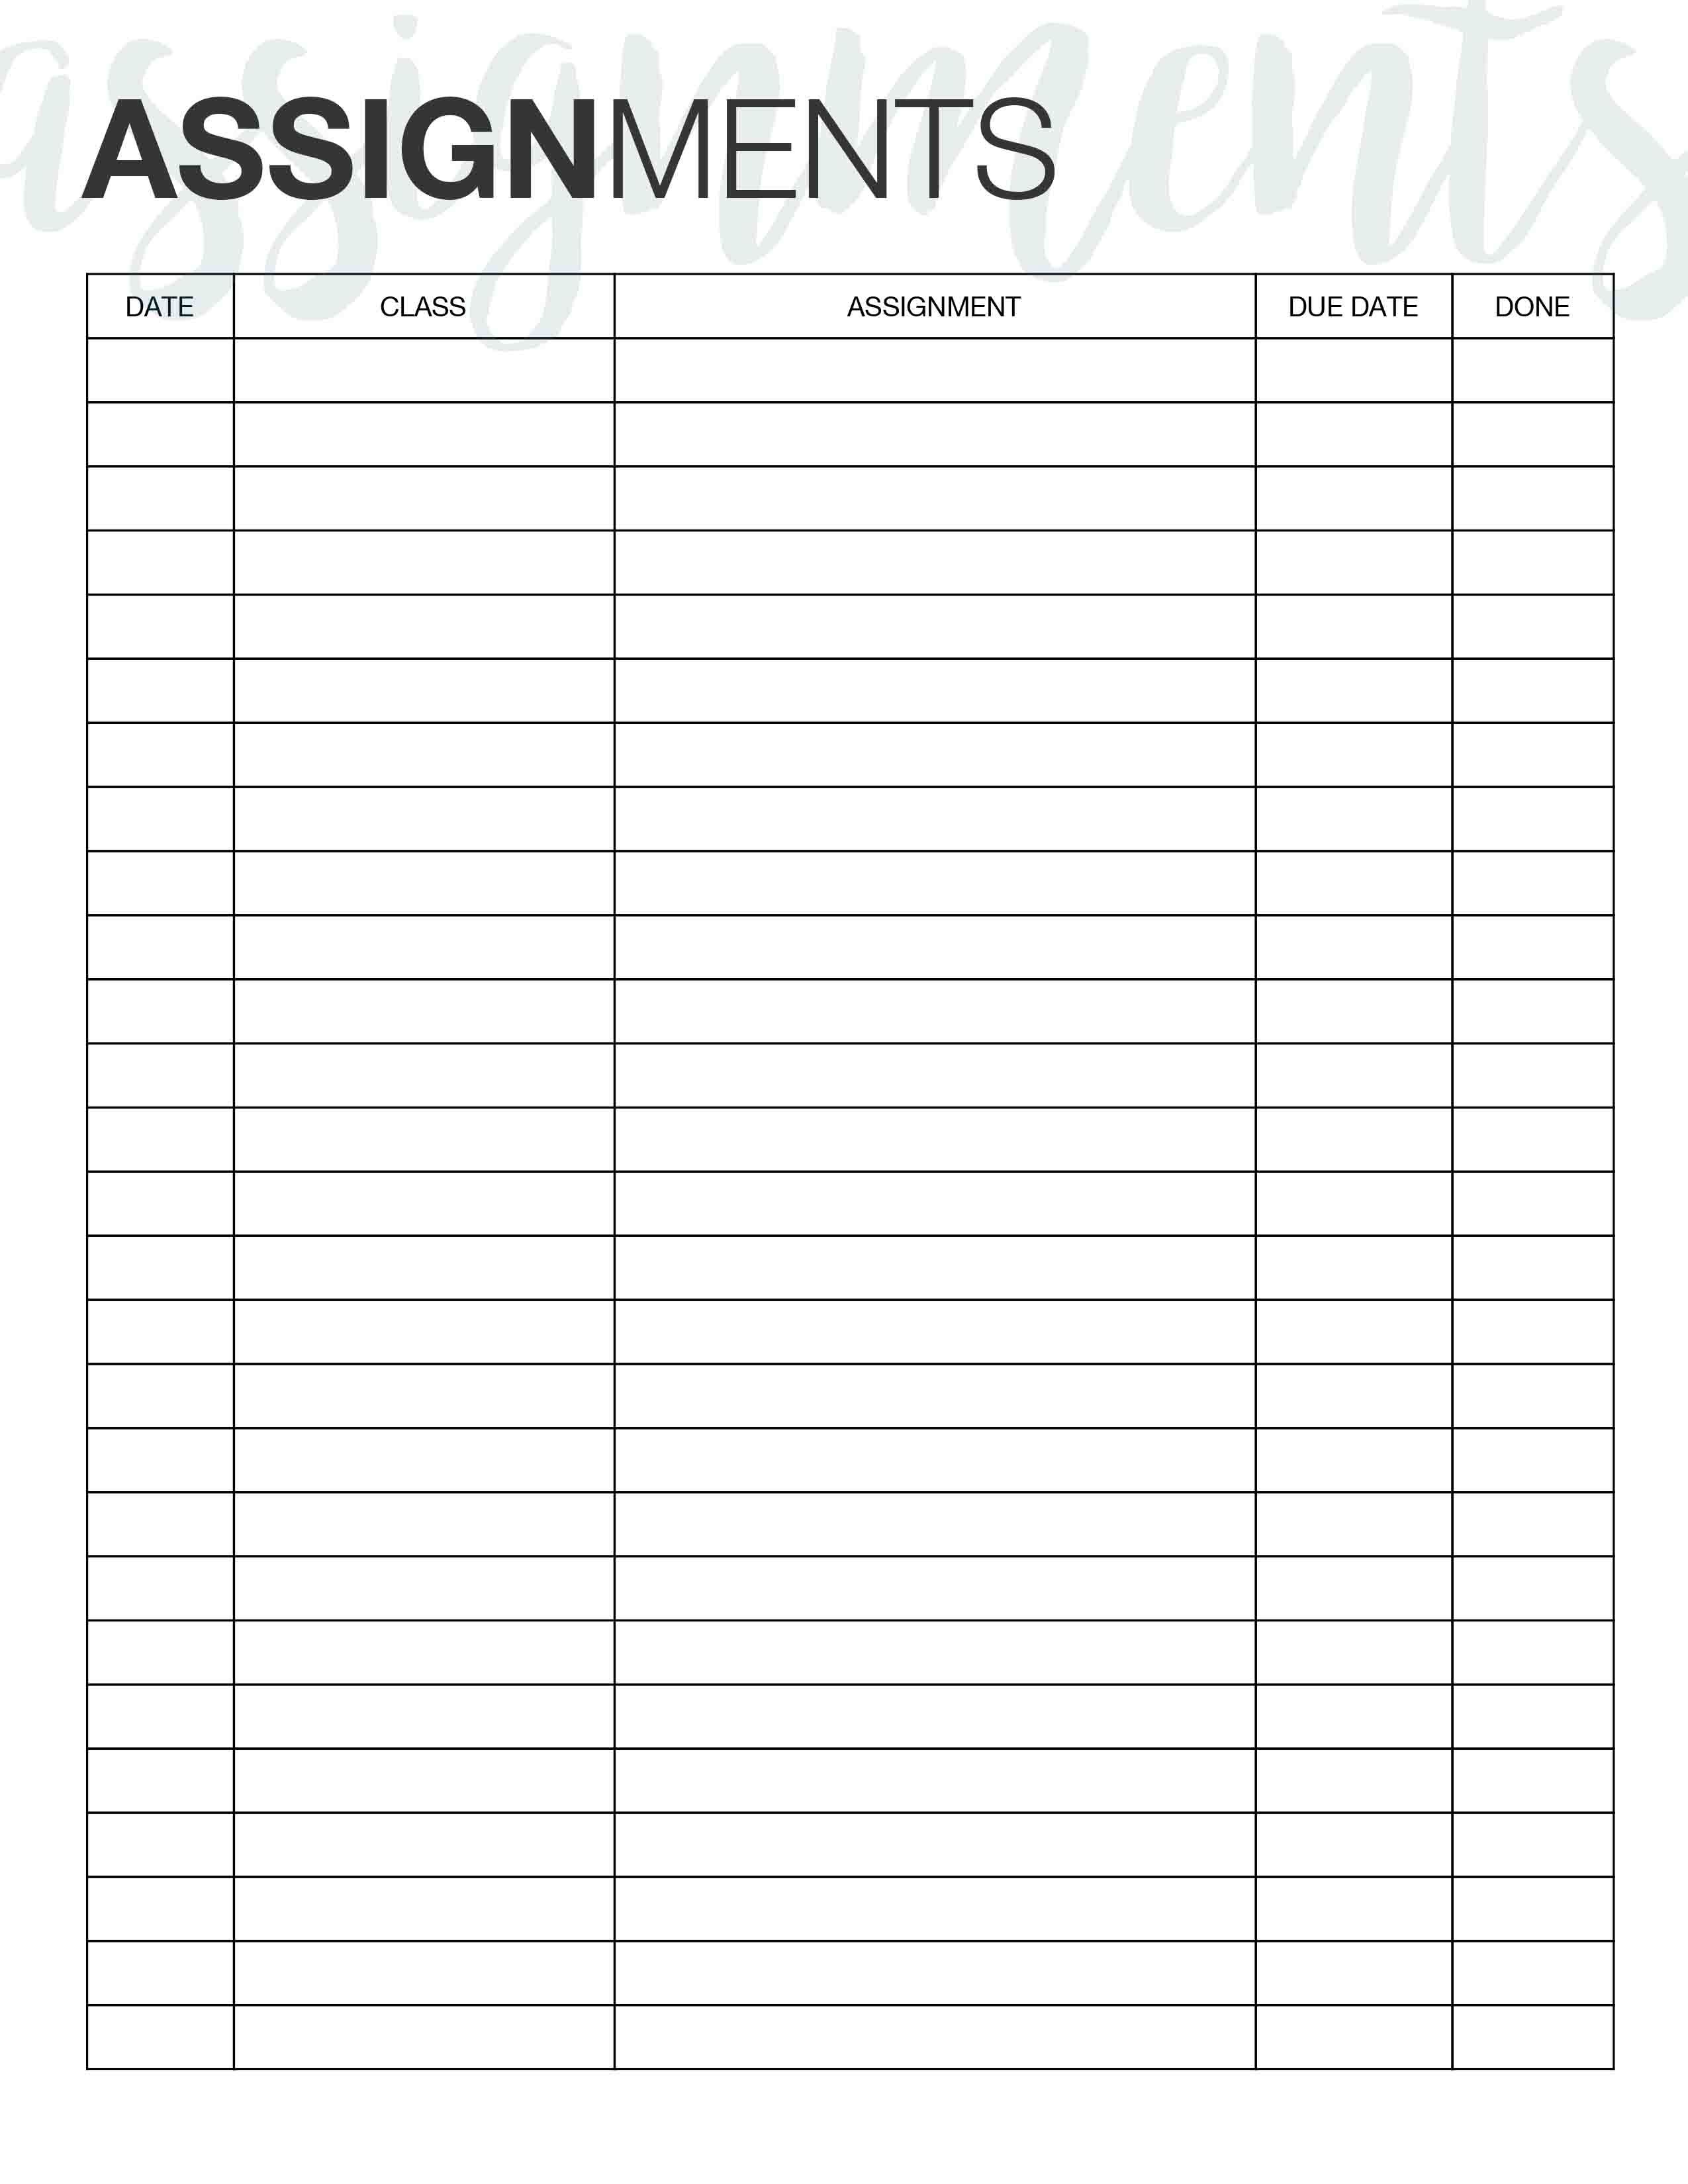 Assignment Tracker. Here&amp;#039;s A Simple Free Printable That You Can Use - Free Printable Homework Assignment Sheets